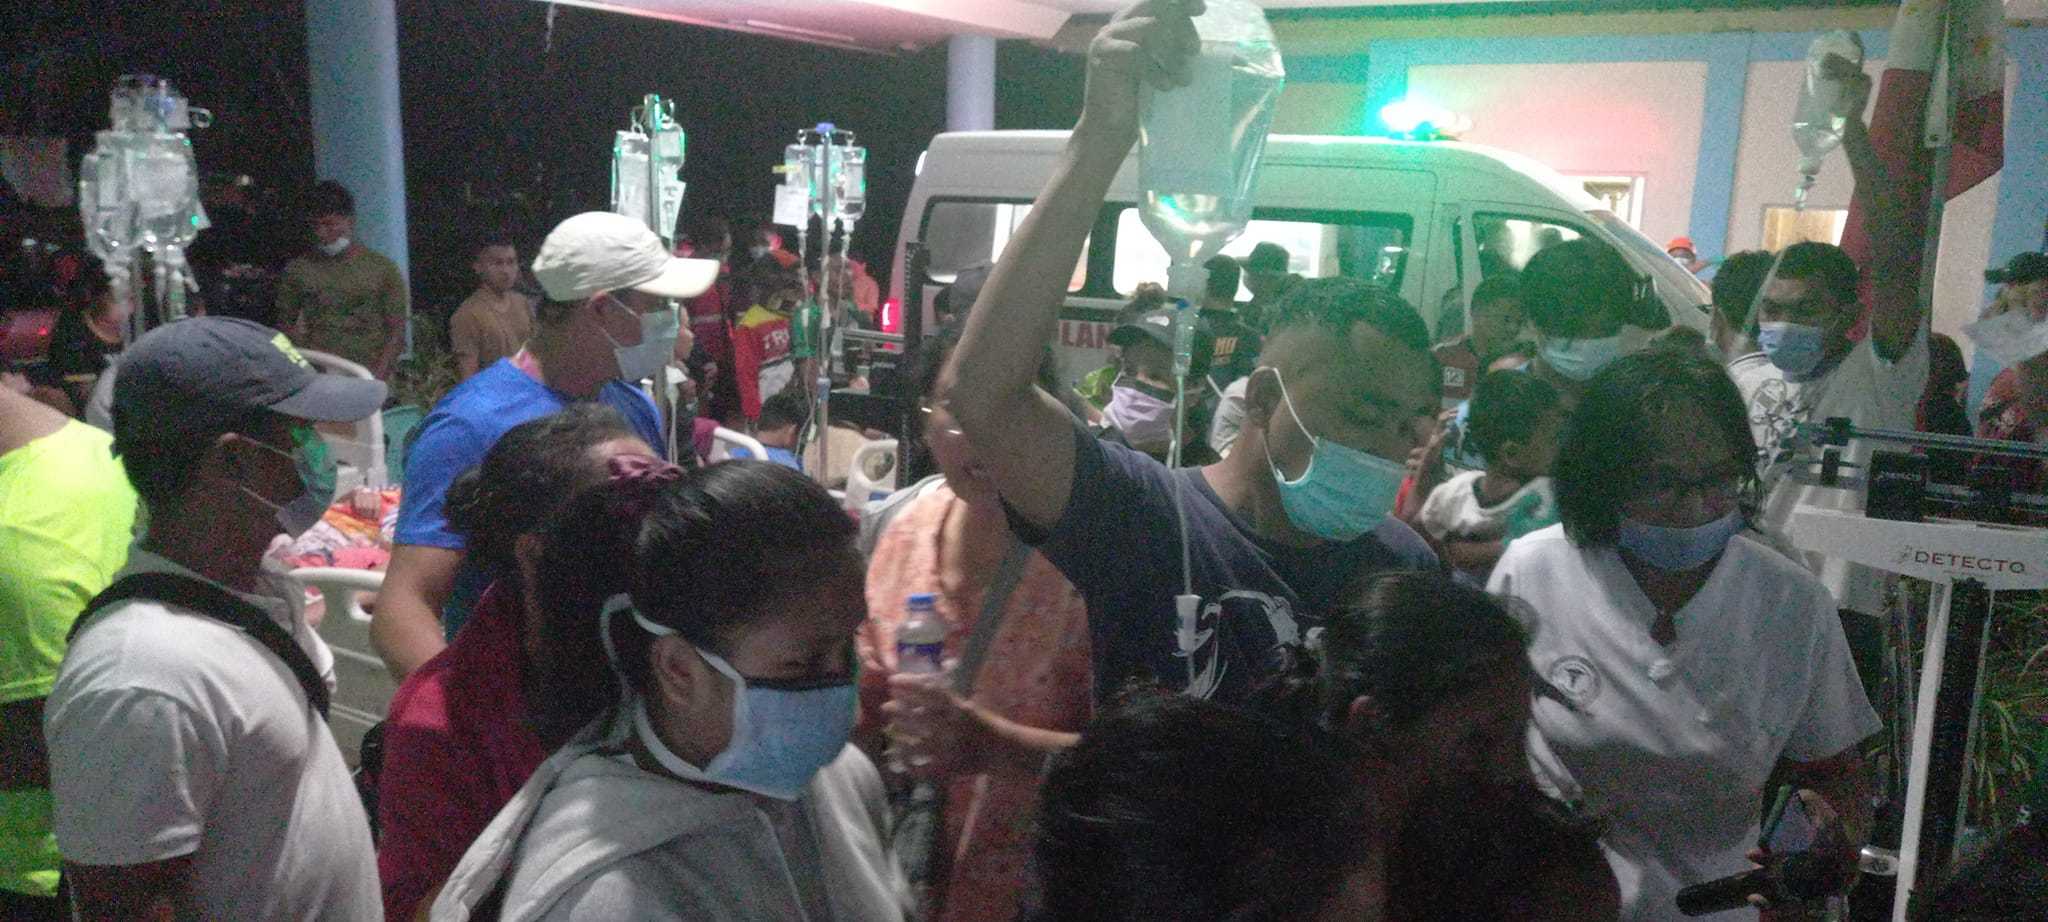 72 people victimized by food poisoning in Esperanza, Agusan del Sur